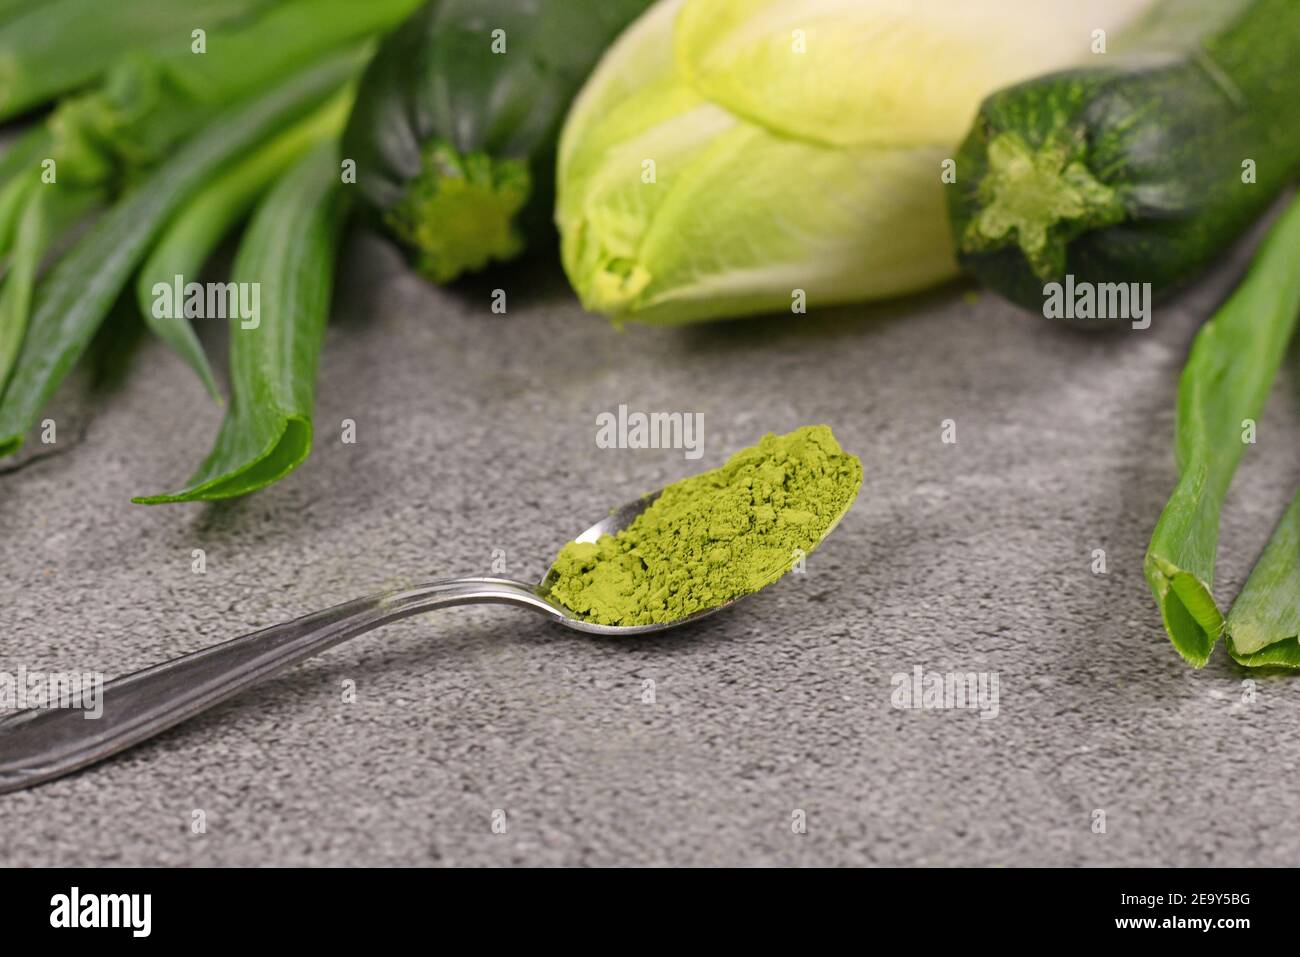 Green powder on spoon in front of raw green vegetables. Concept for natural food coloring or supplements made from vegetables. Stock Photo